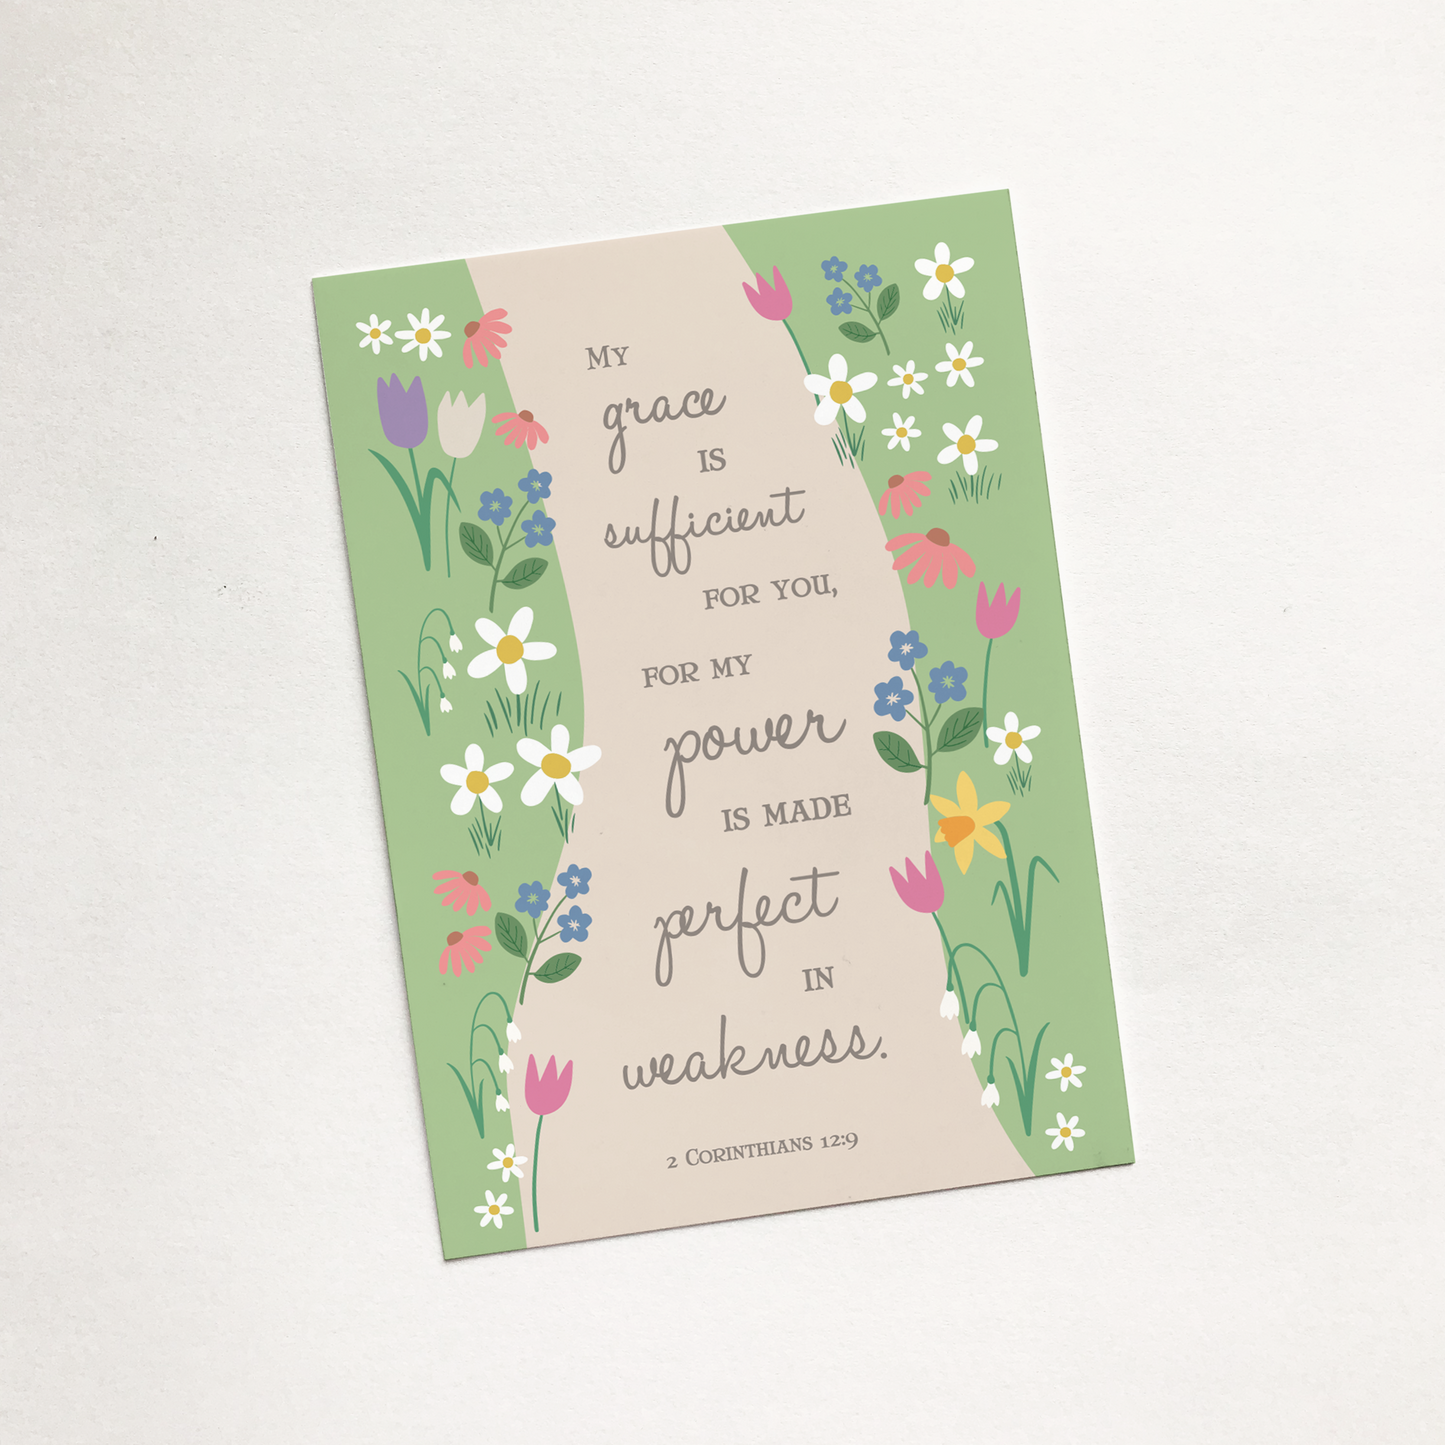 'My Grace is Sufficient' (Garden) - Christian Sharing Card